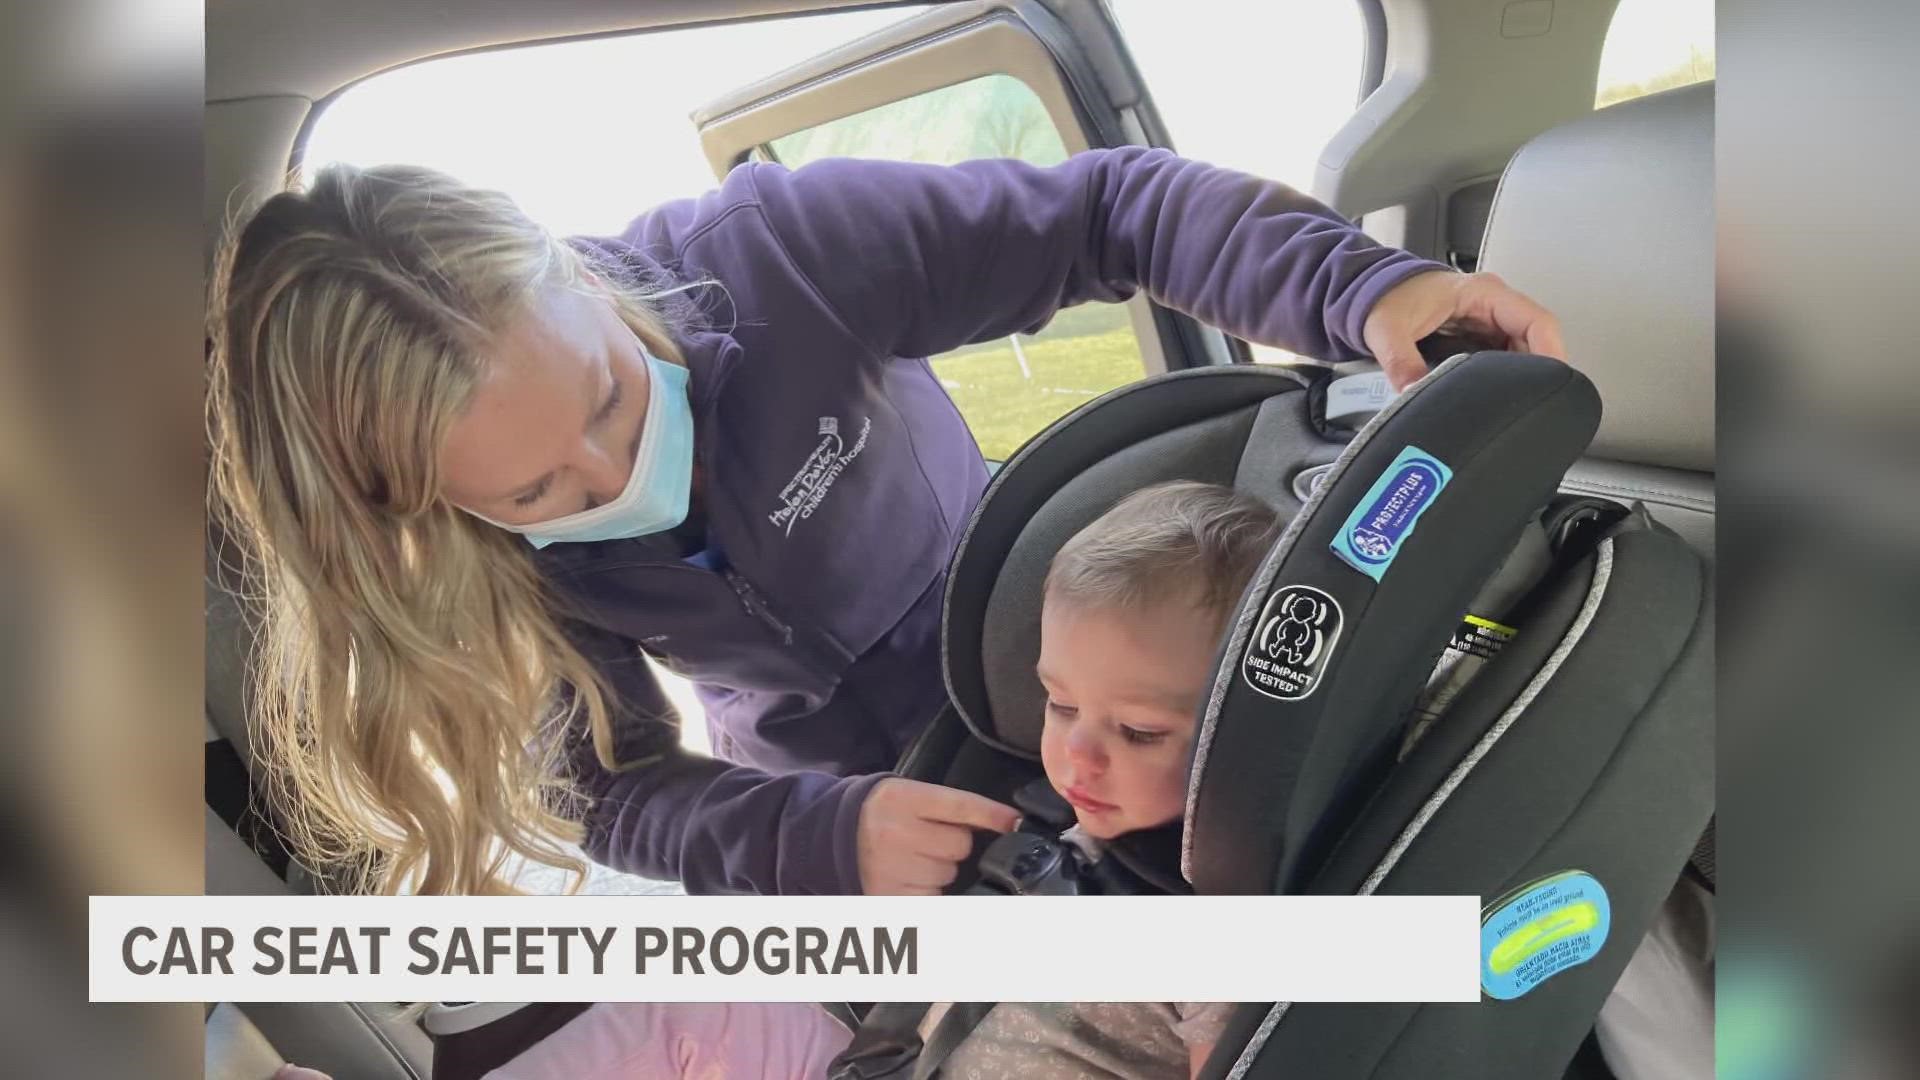 After a head-on crash, Kayleen Landaal says her young girls were entirely unharmed. Now, Landaal is advocating for car seat safety programs.